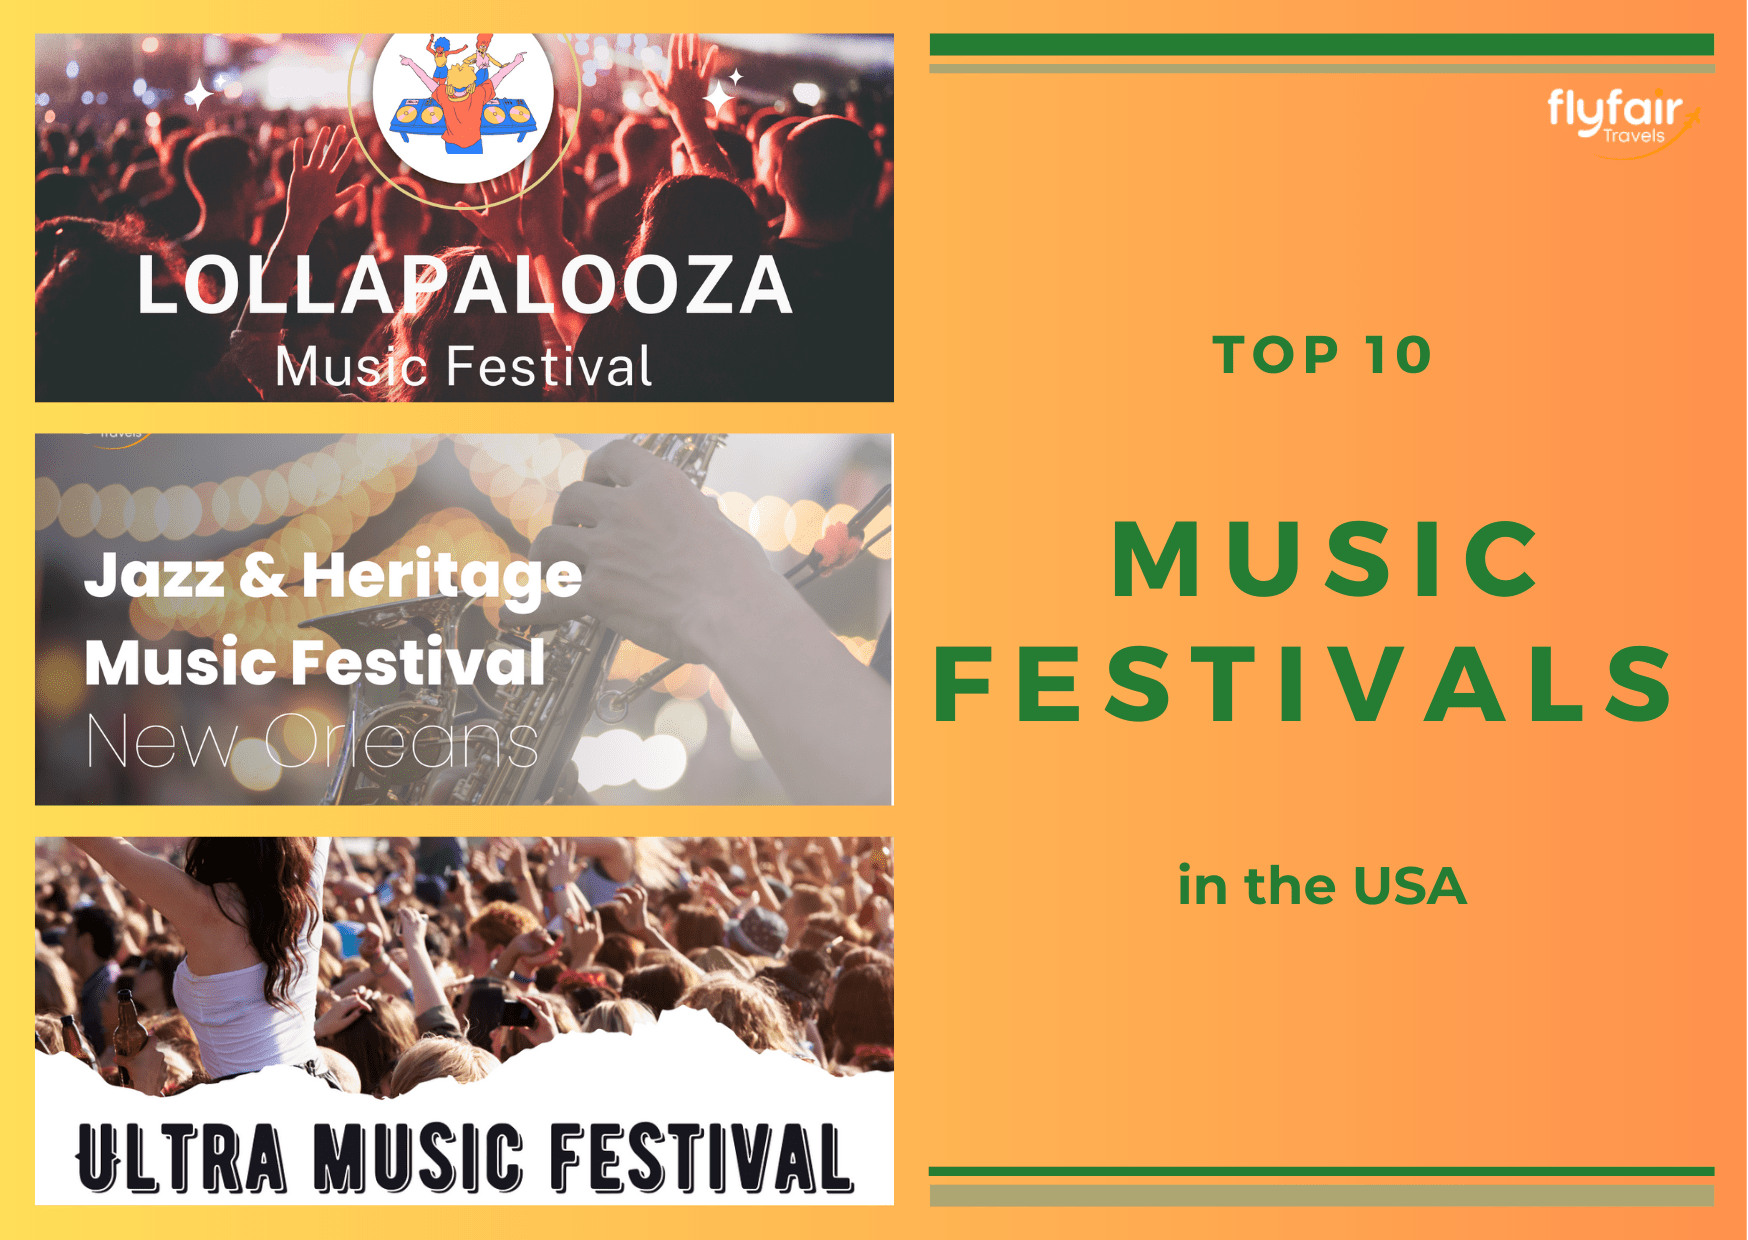 Top_10_Music_Festivals_in_the_USA